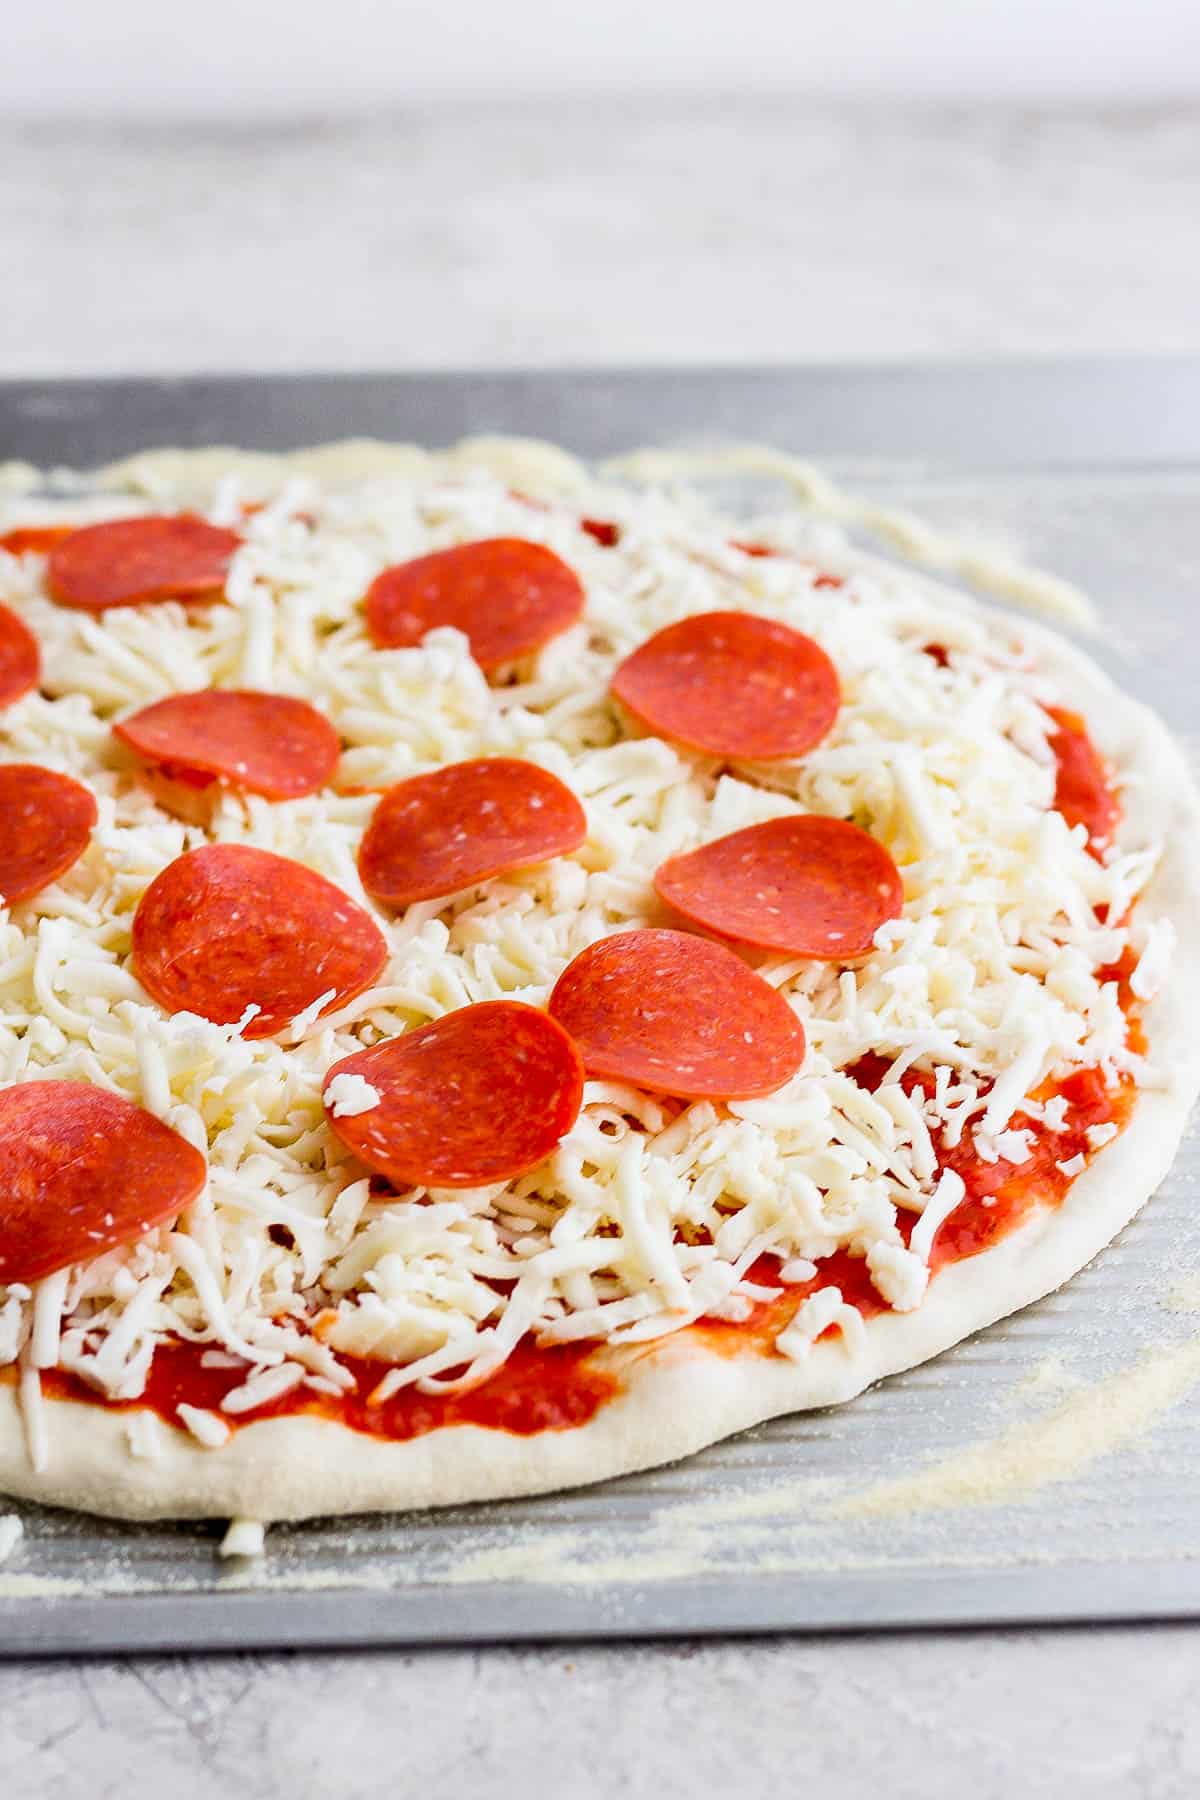 Pizza dough with sauce, cheese, and pepperoni on top.